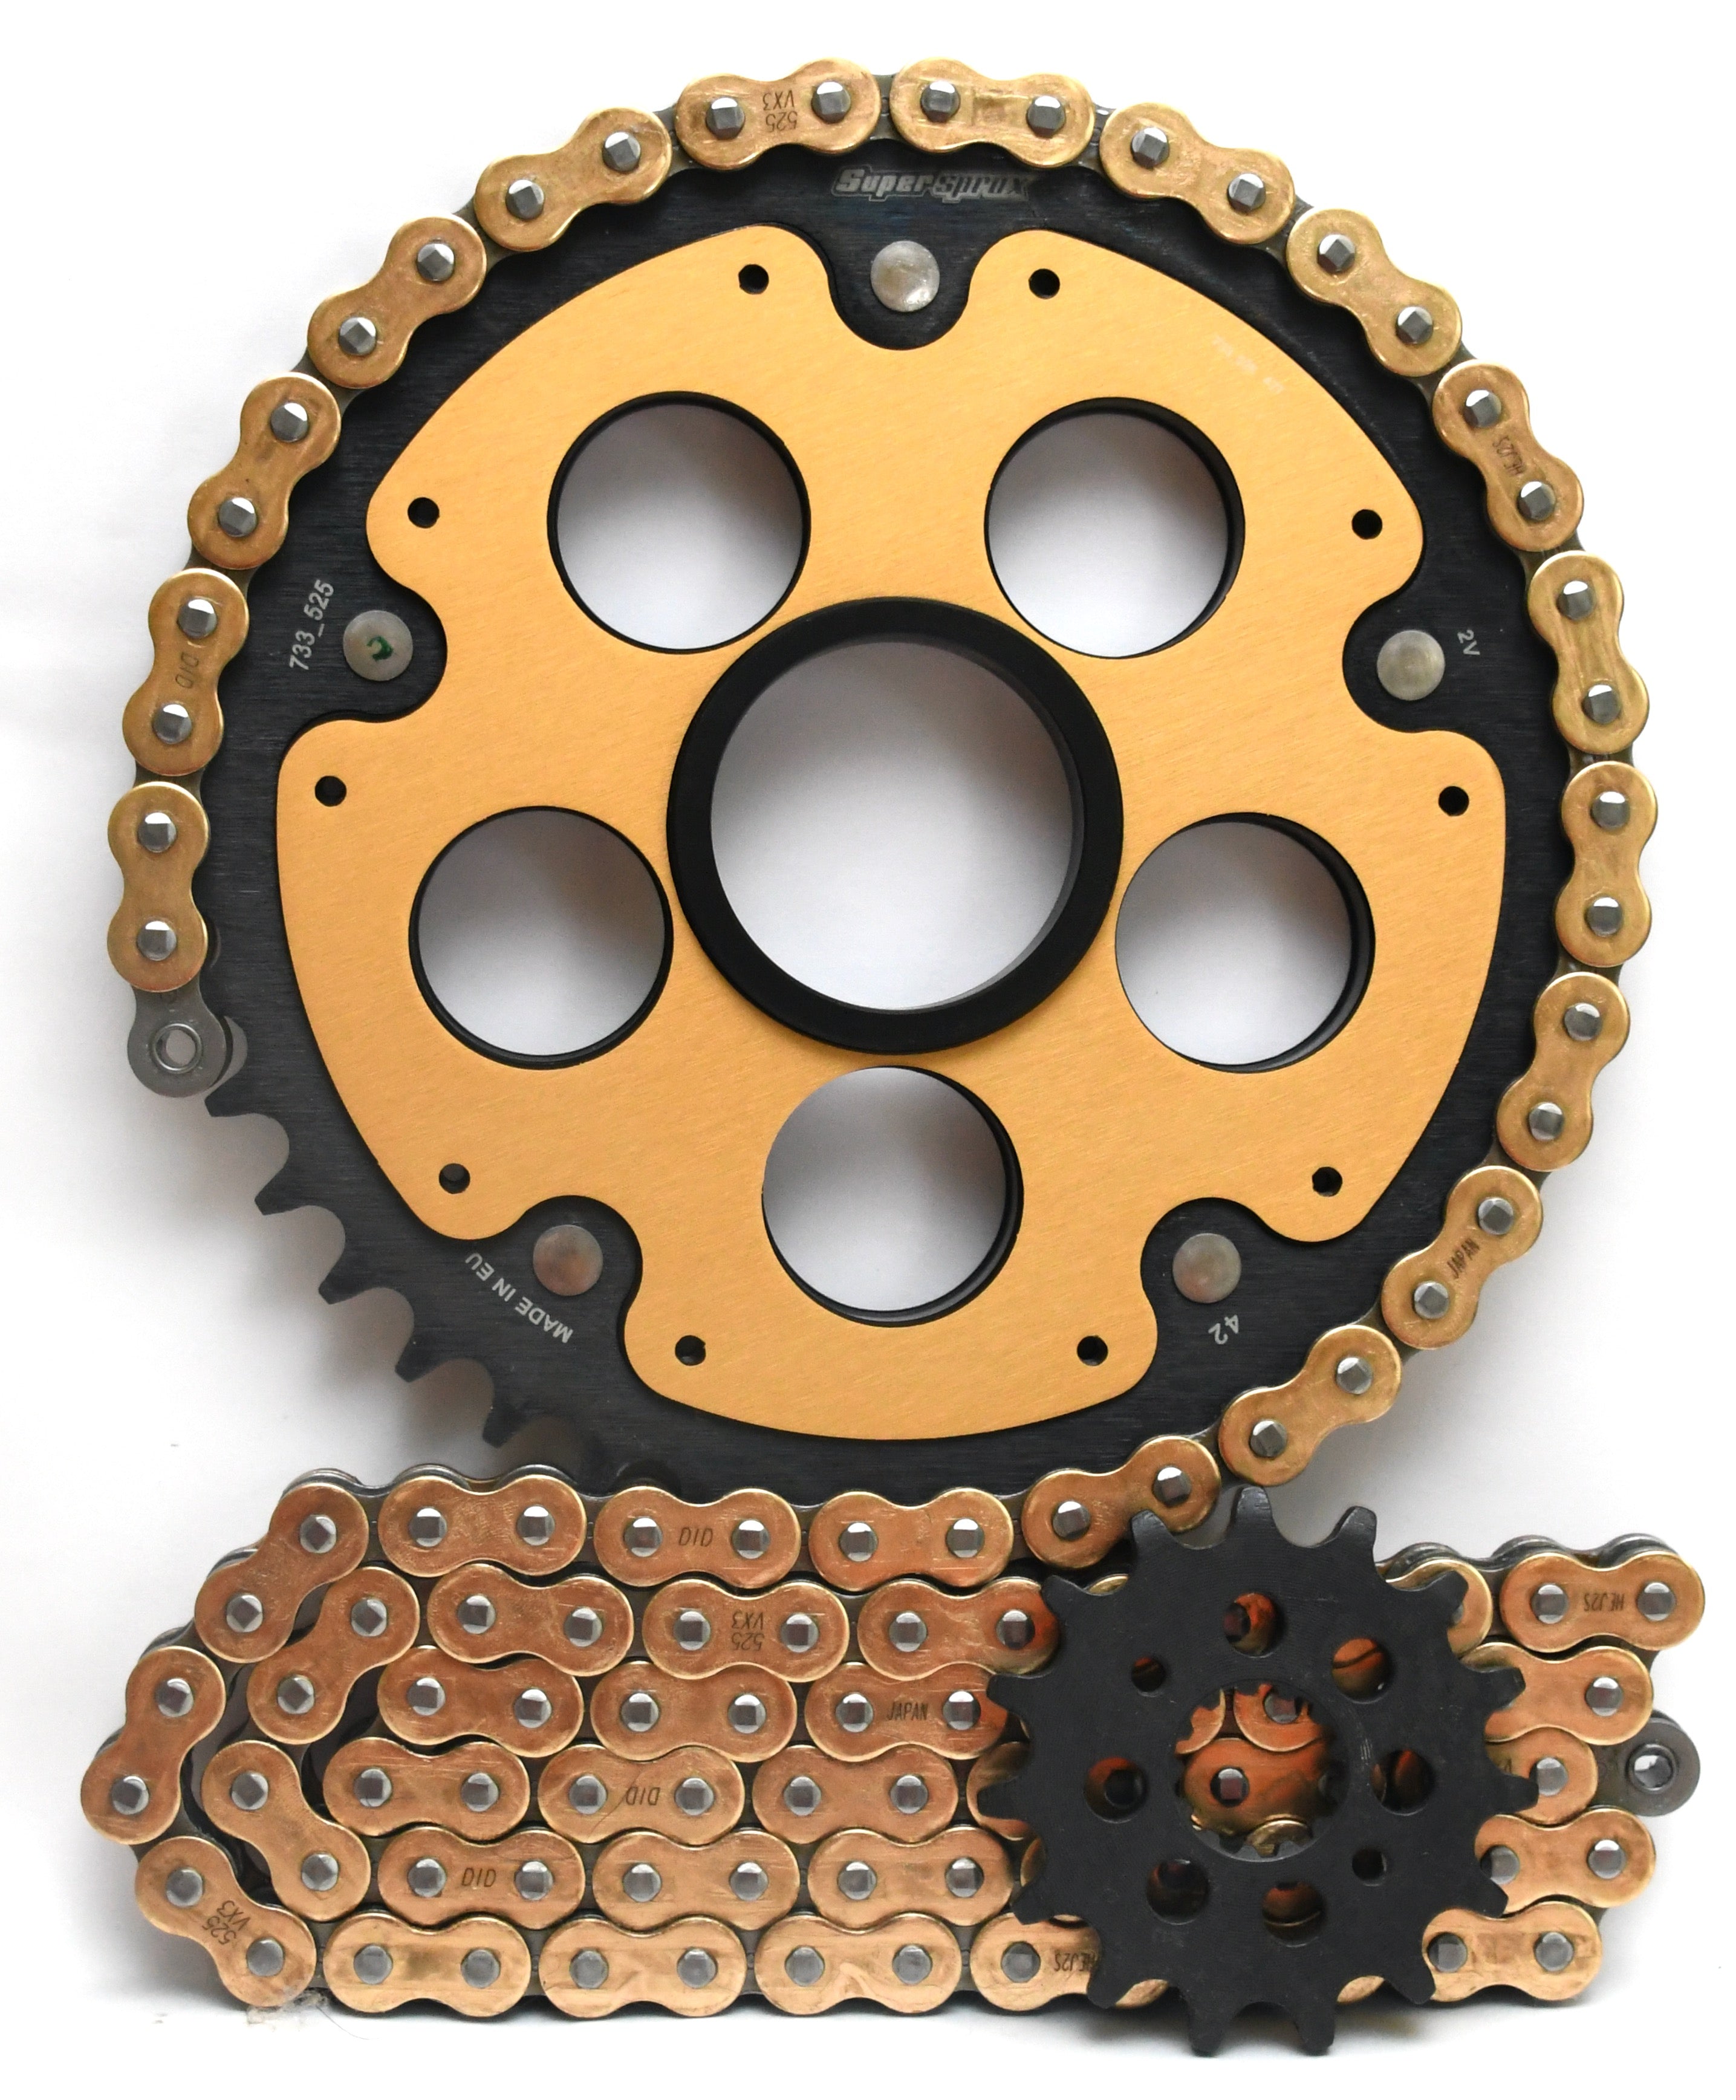 Supersprox Chain & Sprocket Kit for Ducati Streetfighter 848 2011-2015 - Standard Gearing